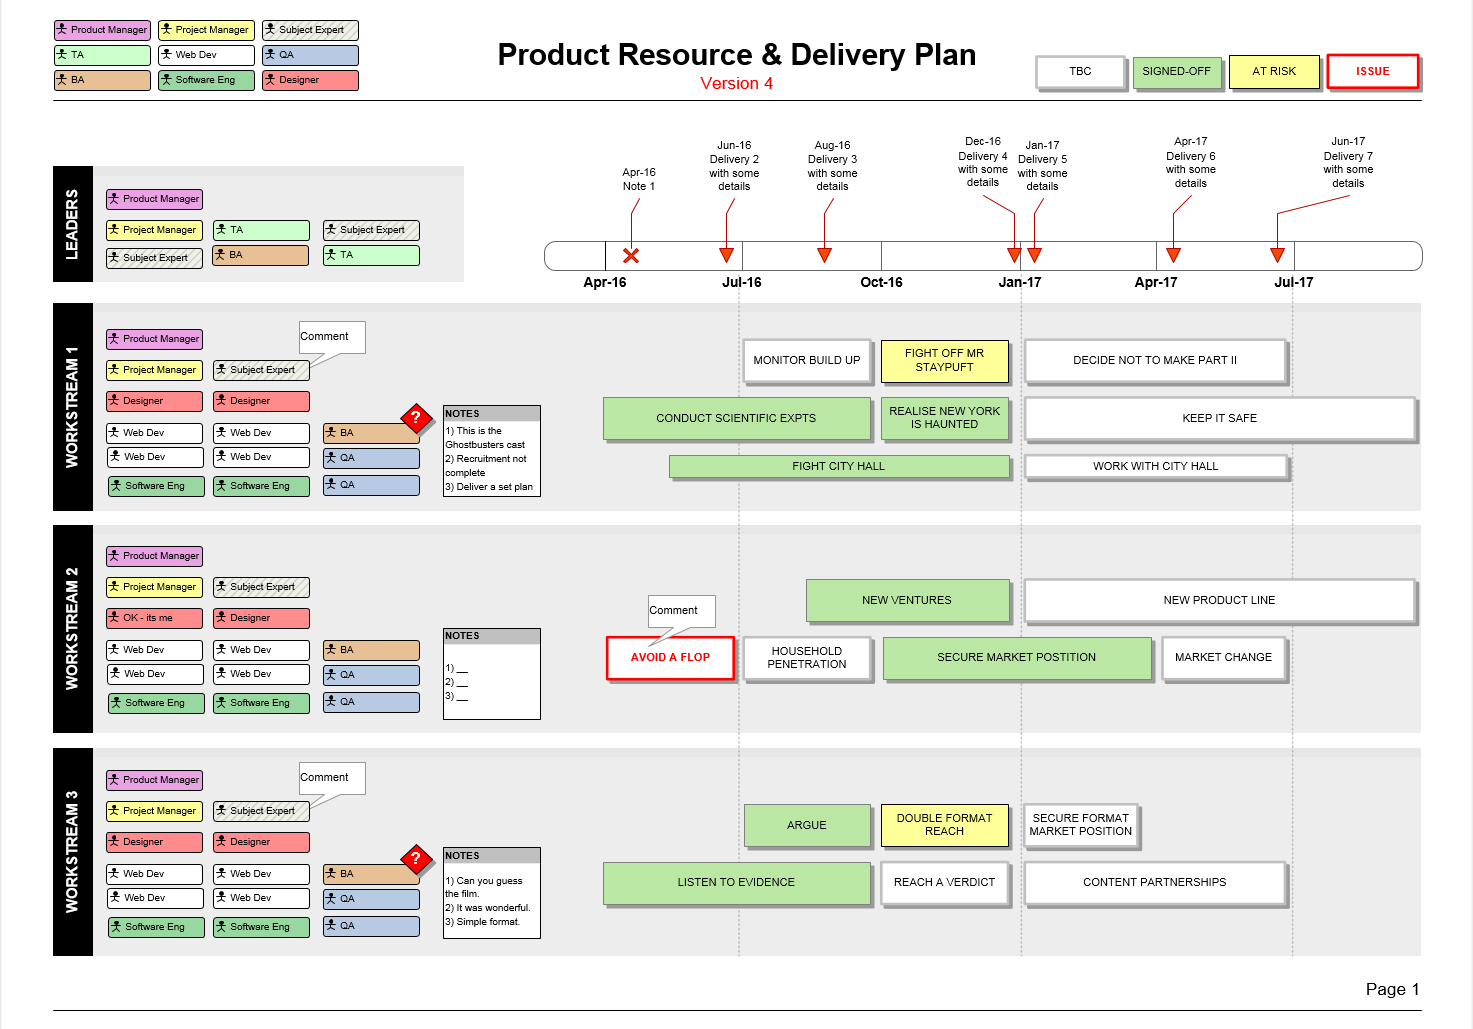 Product Resource & Delivery Plan (Visio) showing teams, resources, themes and Timeline